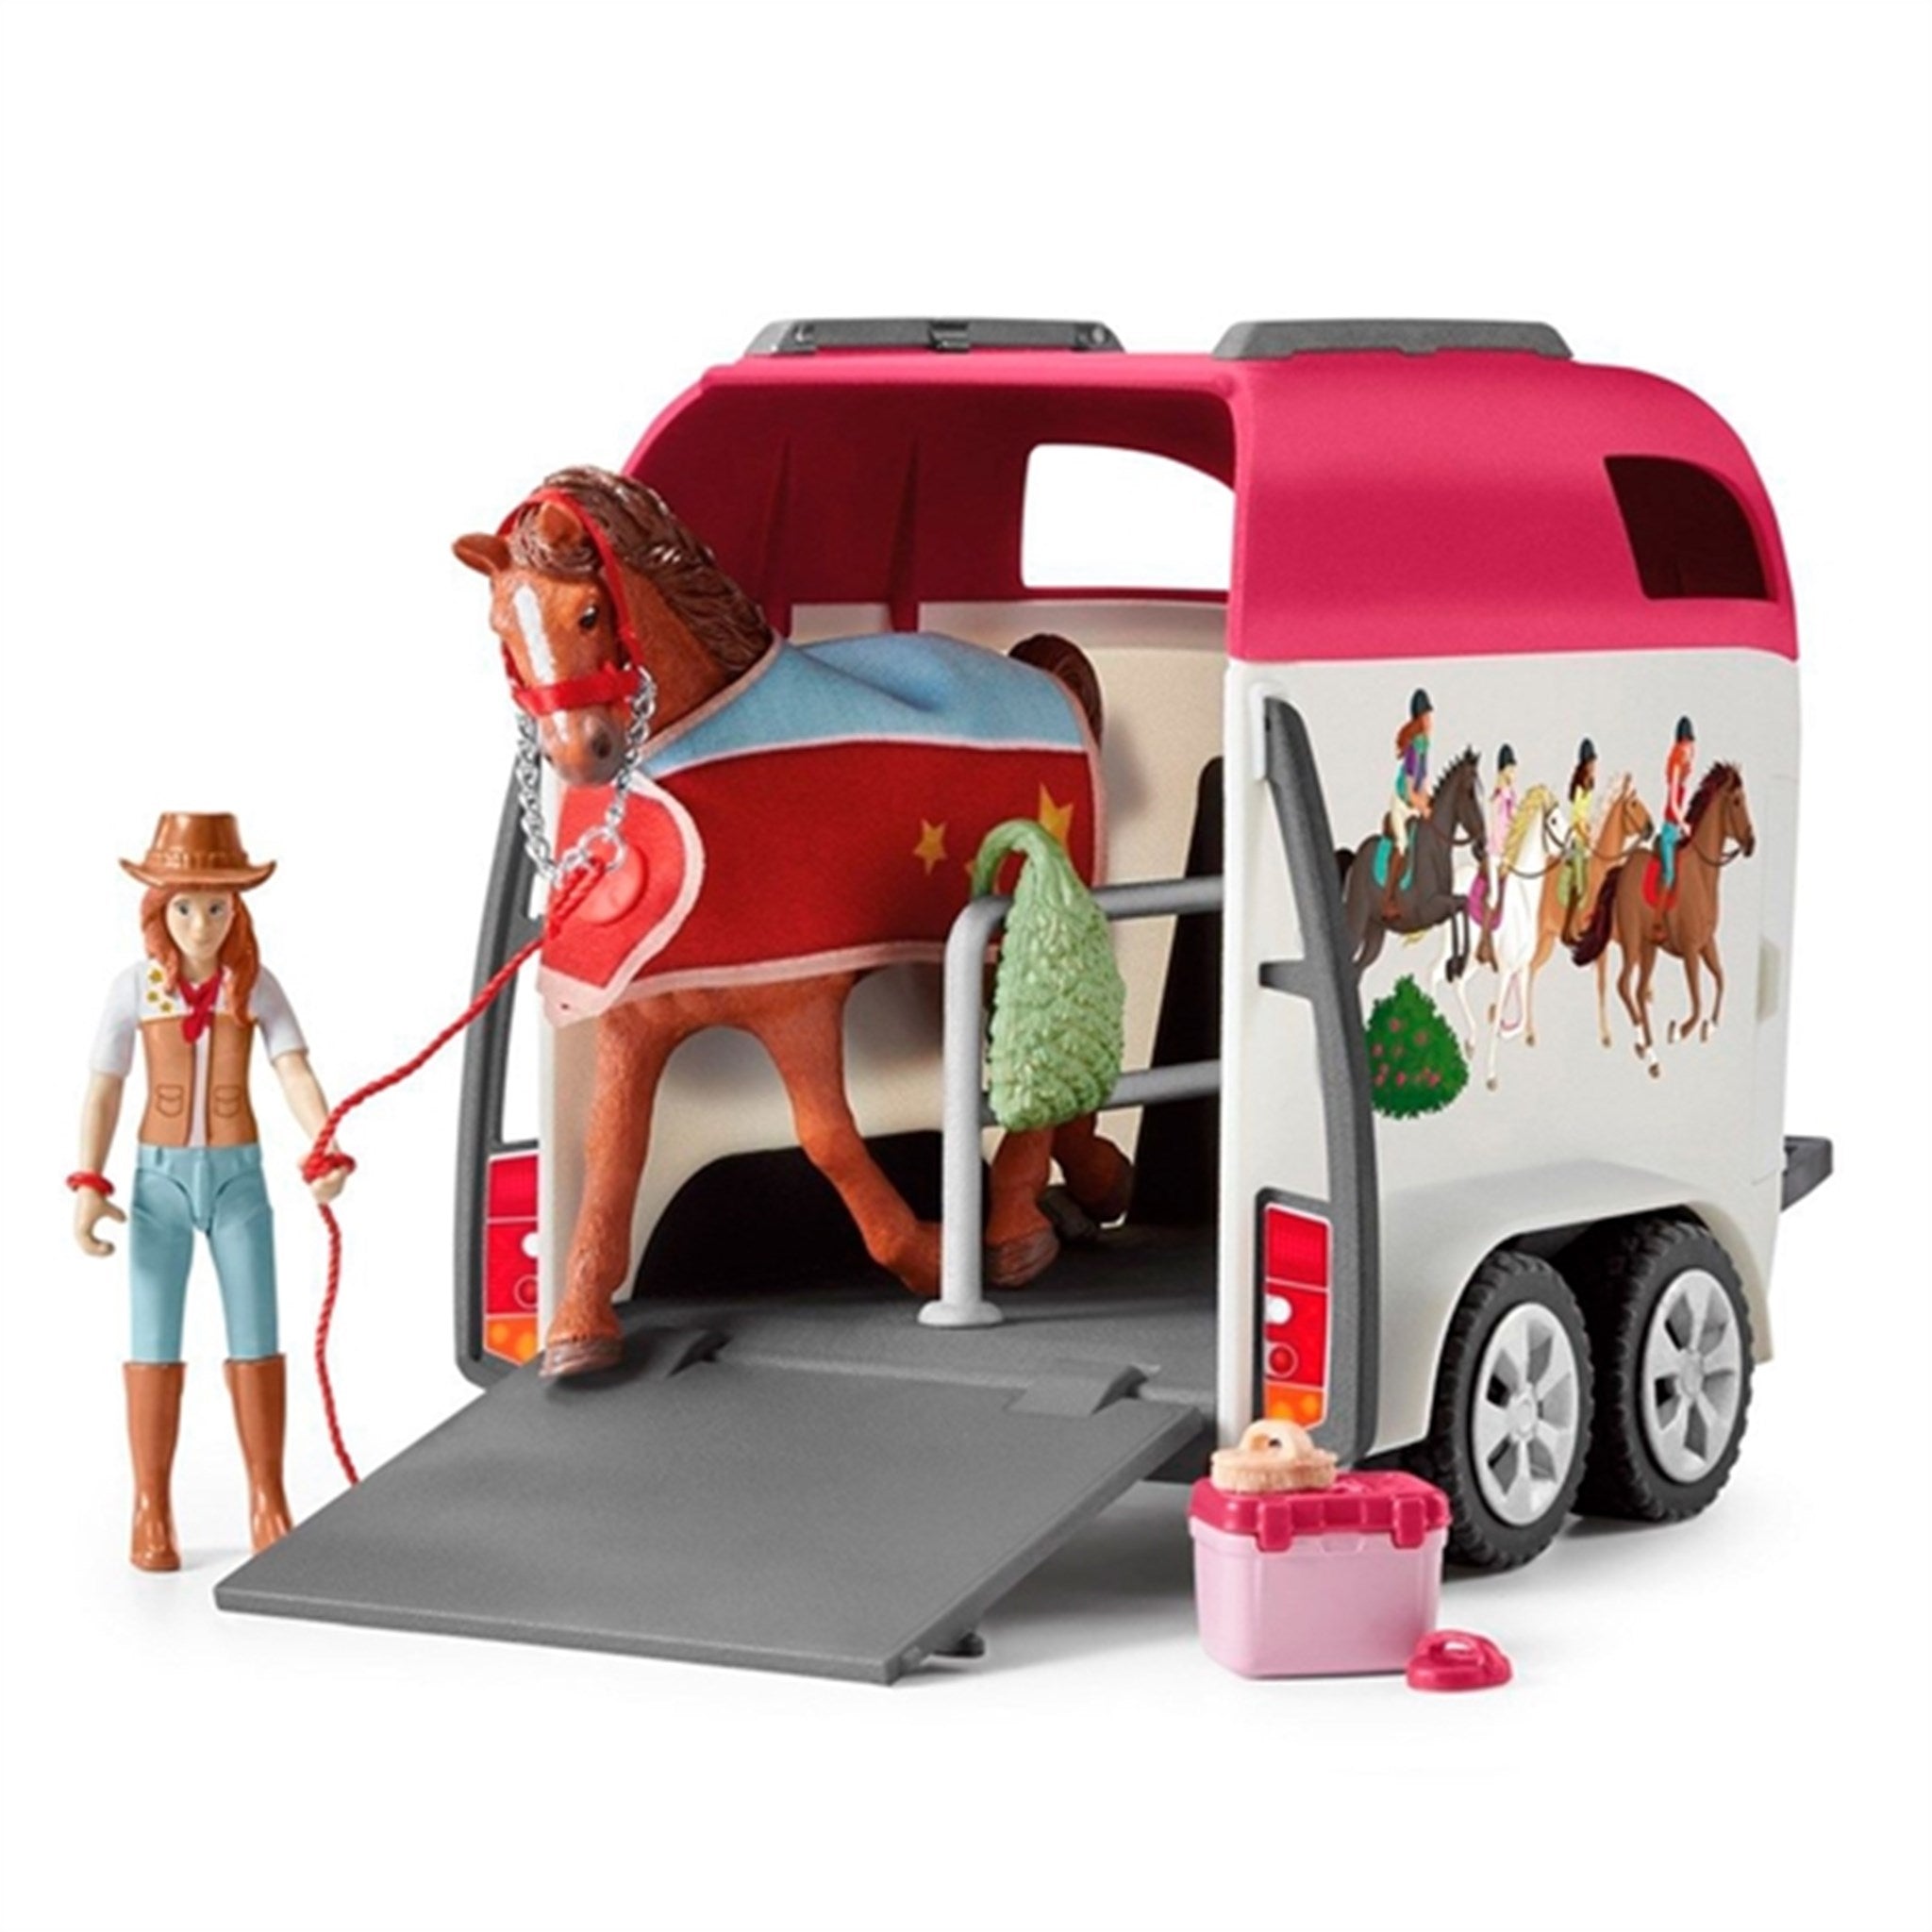 Schleich Horse Club Adventures with Car and Trailer 4